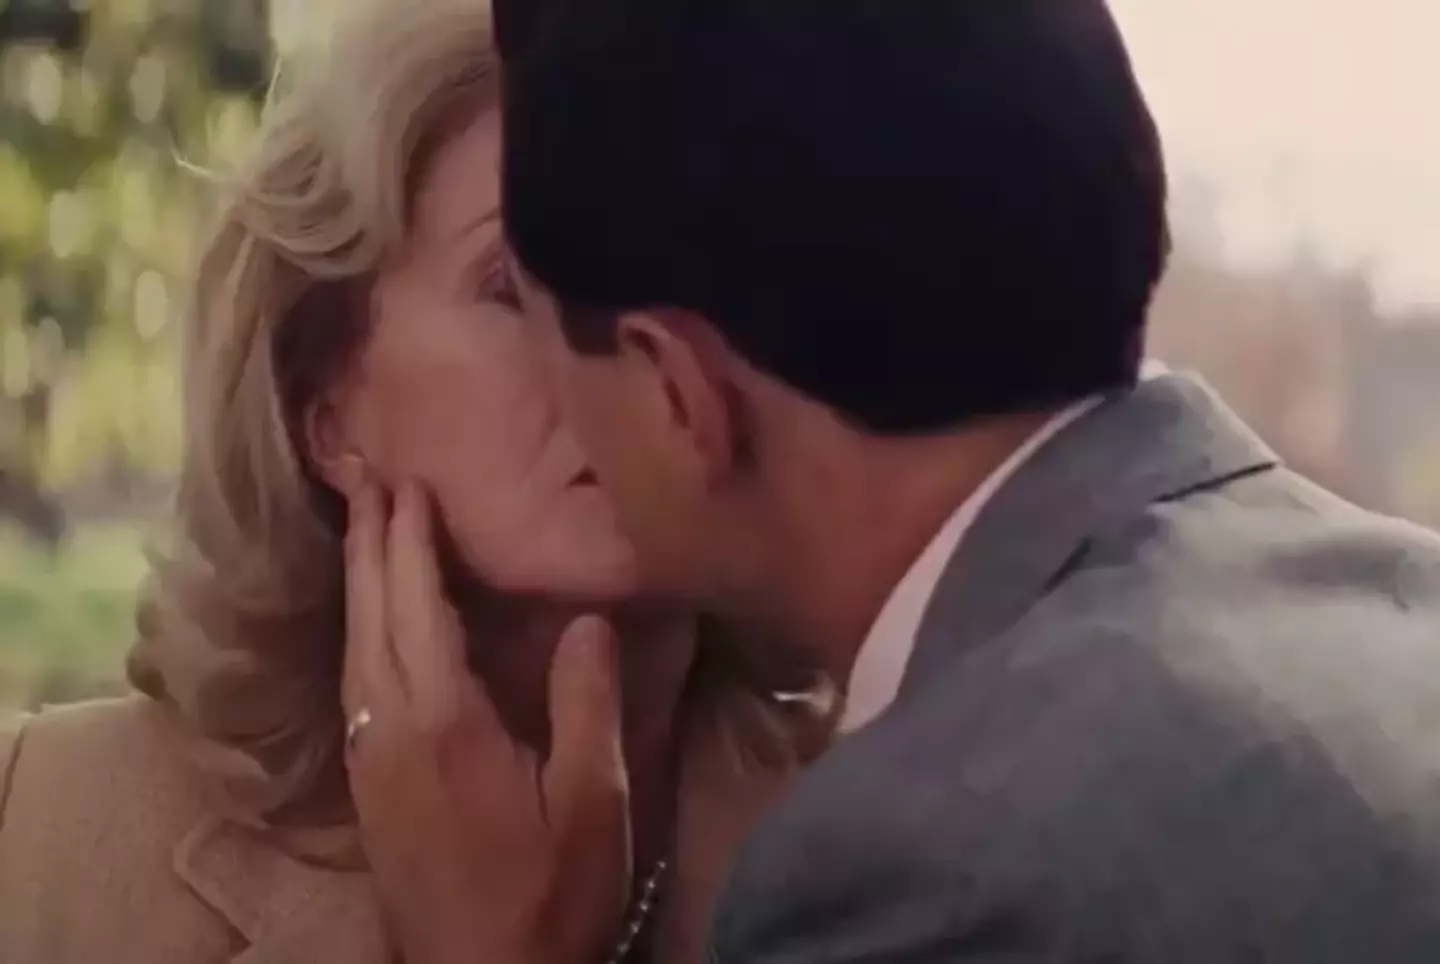 Joanna Lumley played the role of Naomi Belfort's classy British aunt Emma in The Wolf of Wall Street.